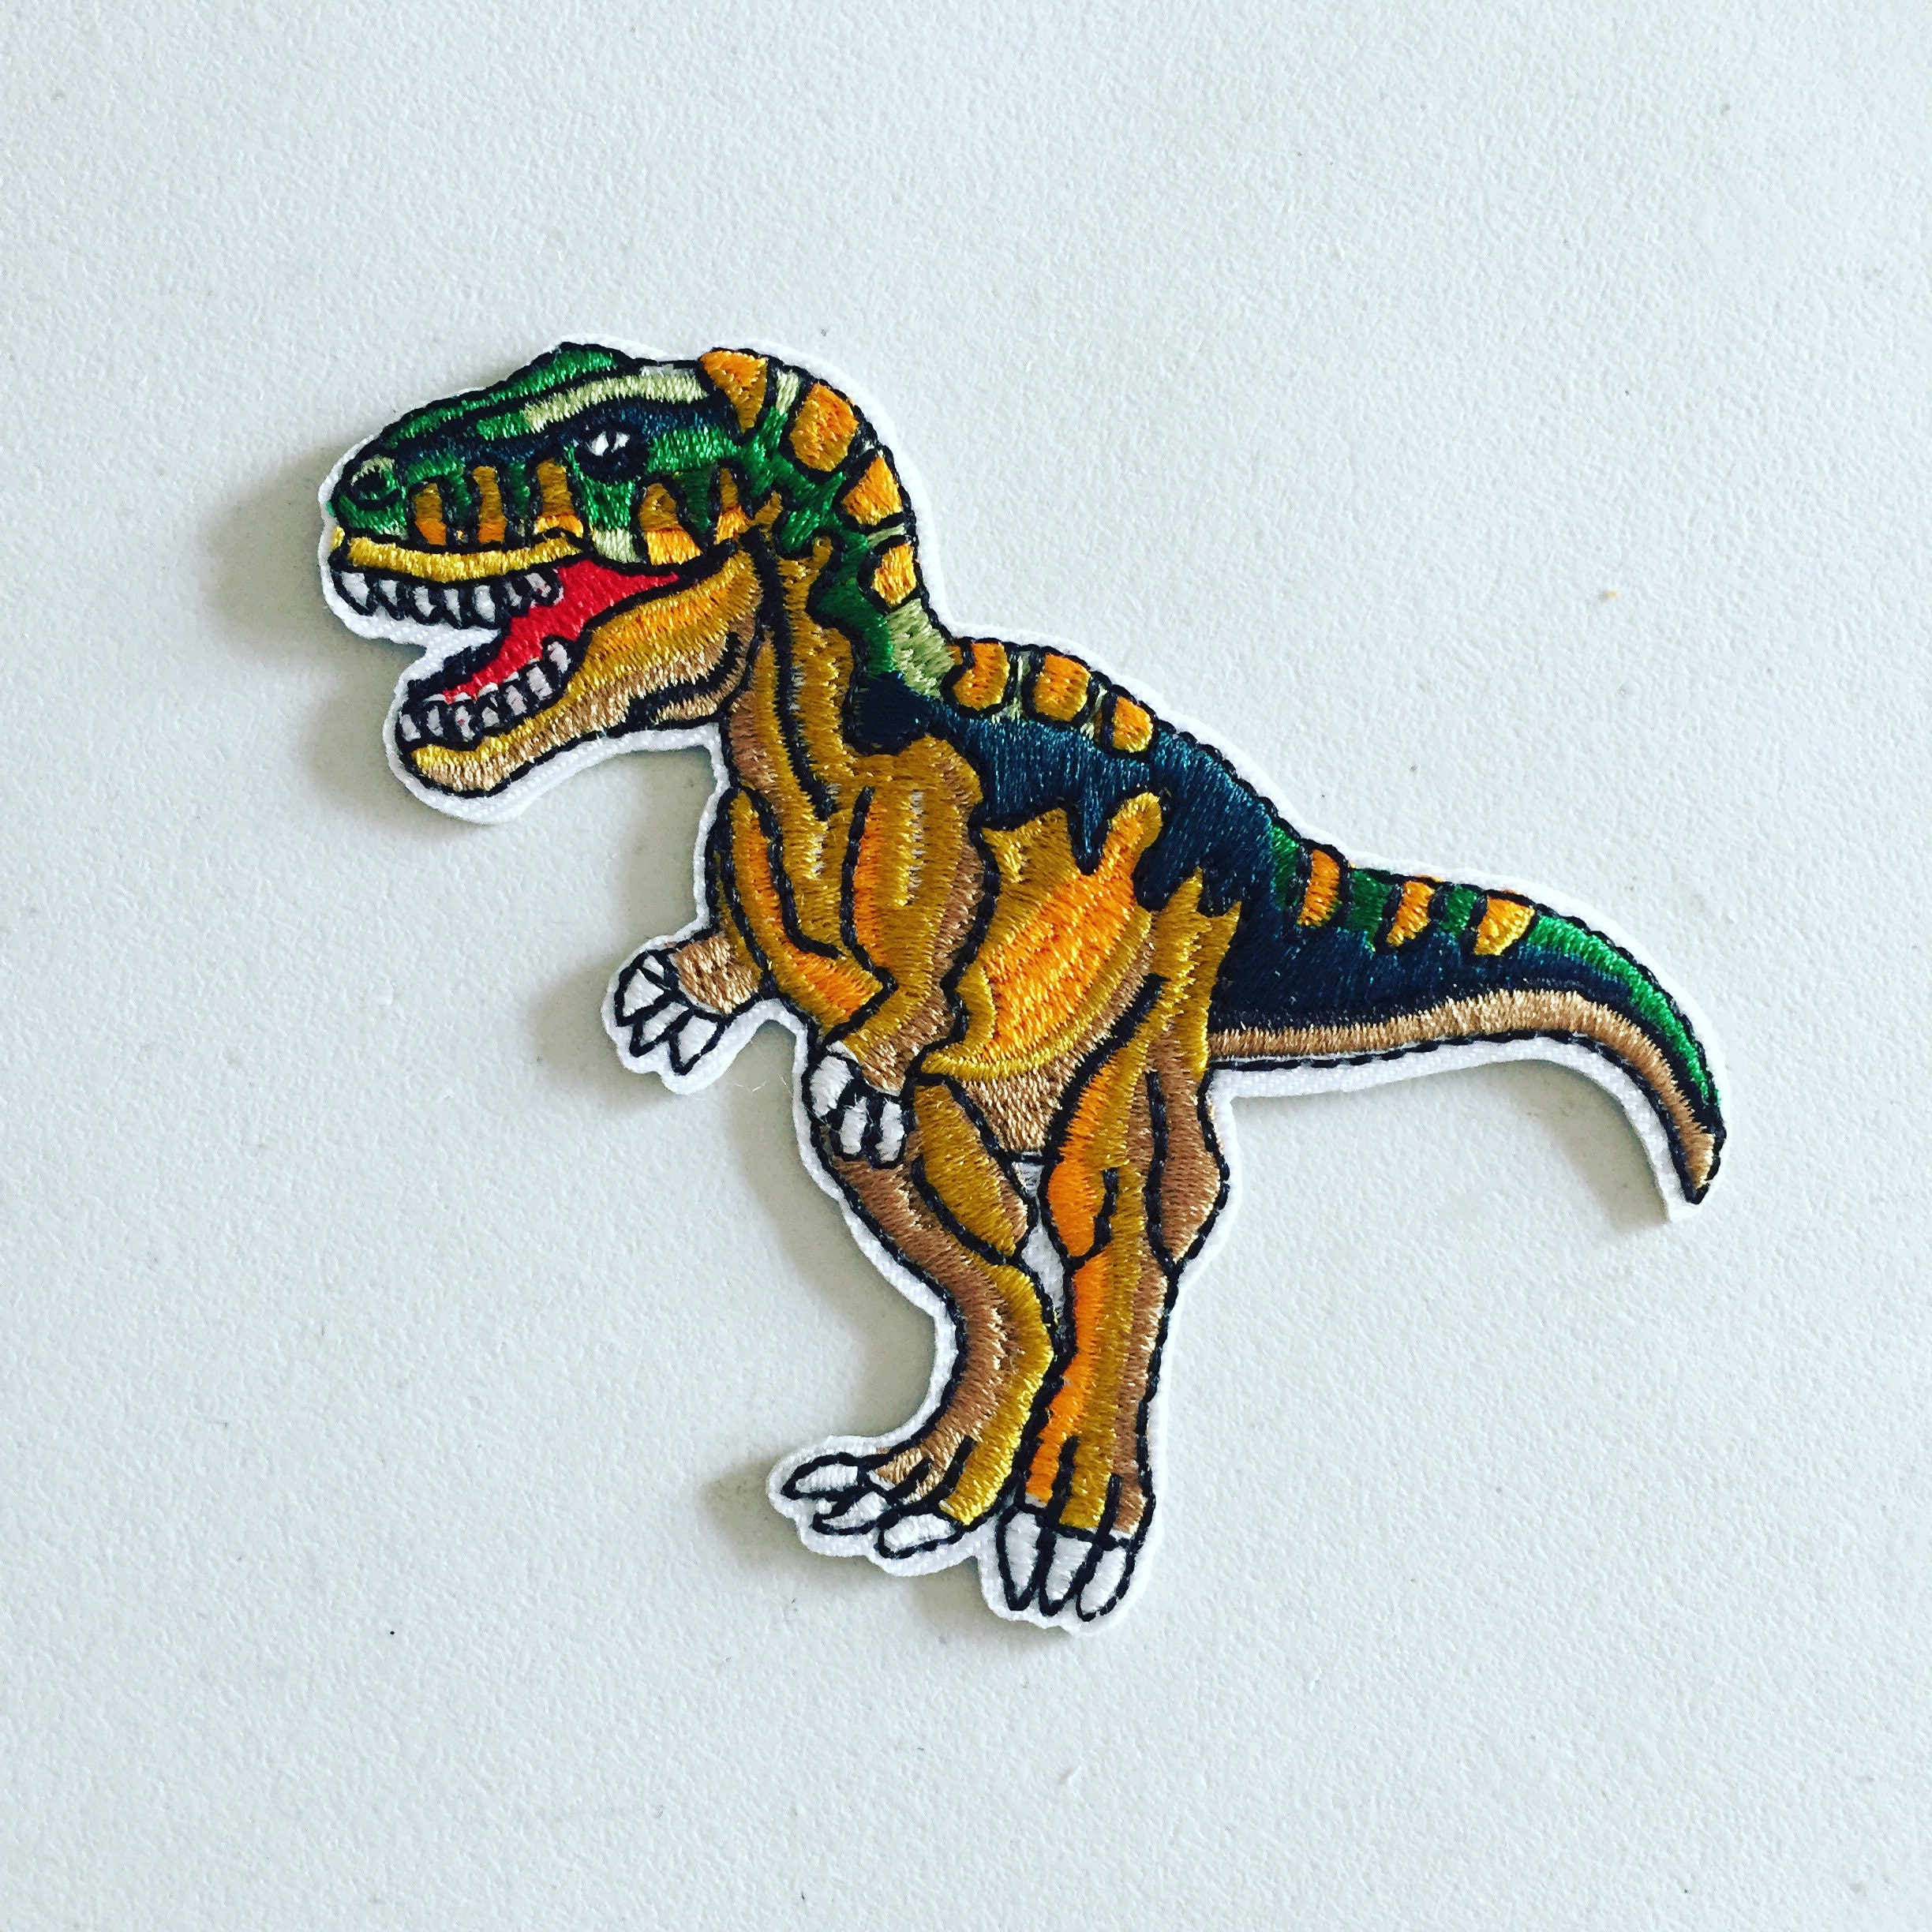 Masked Dinosaur Embroidered Sew On Iron On Patch Badge Fabric DIY Craft Transfer